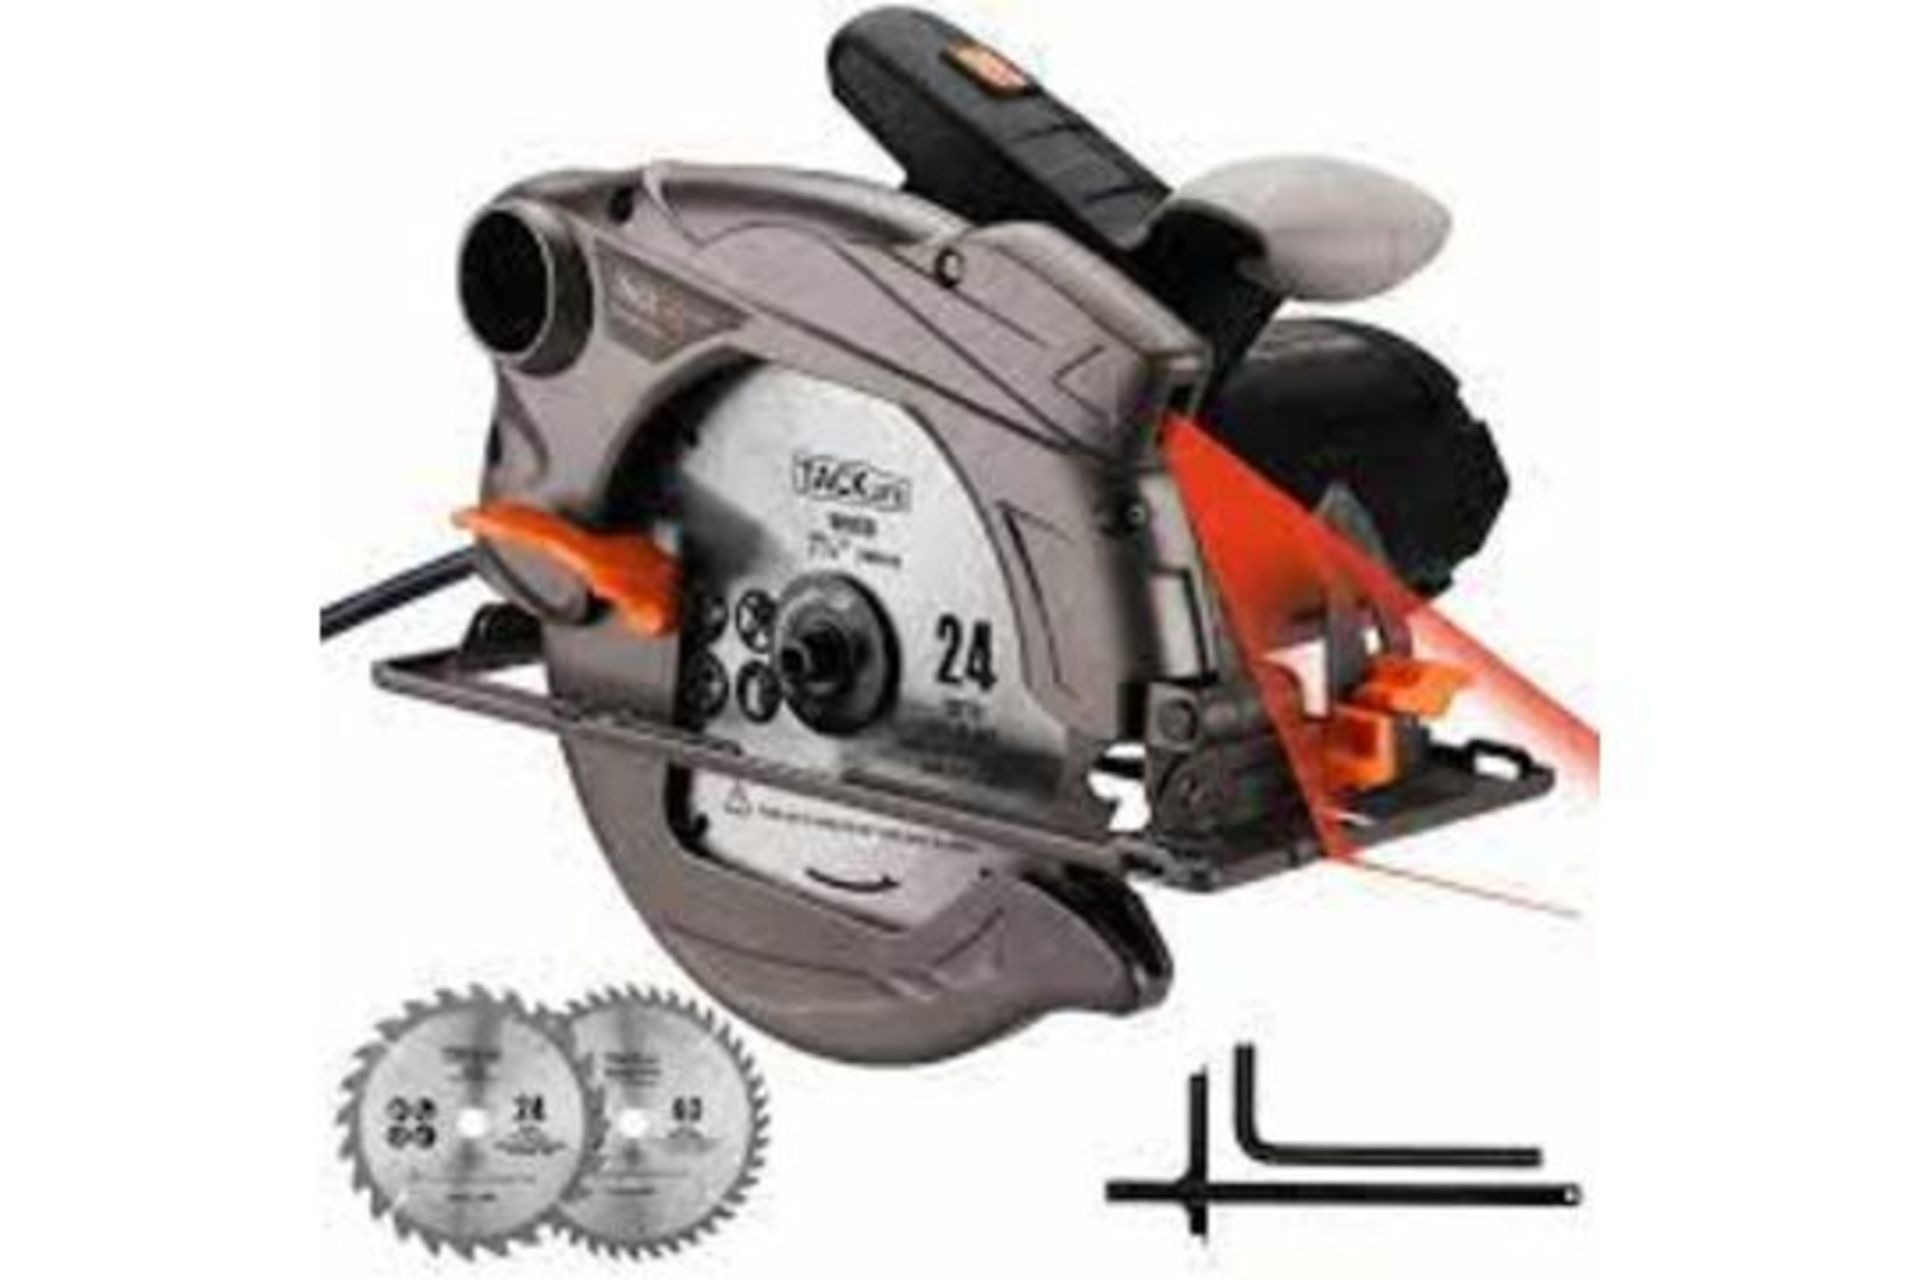 2 x Trade Lot New Boxed Tacklife Electric Circular Saw,1500W, 5000 RPM With Bevel Cuts 2-3/5'